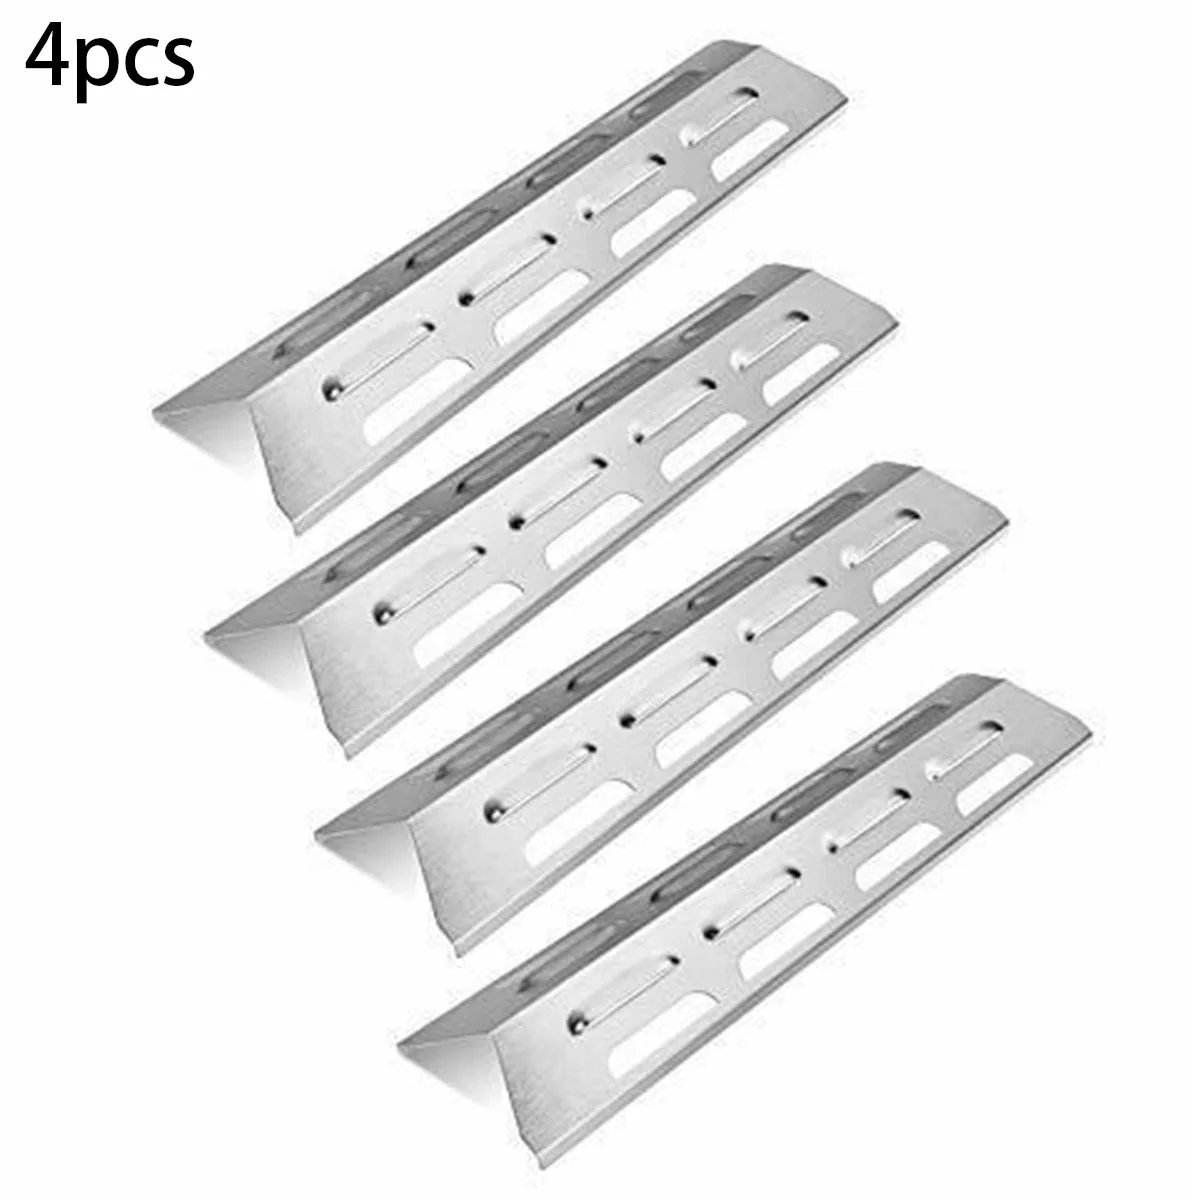 

4Pcs Replacement Stainless Steel Heat Plate Shield Barbeque Grill Perfect Flame Gas Grill Models SLG2007A, SLG2007B, SLG2007BN